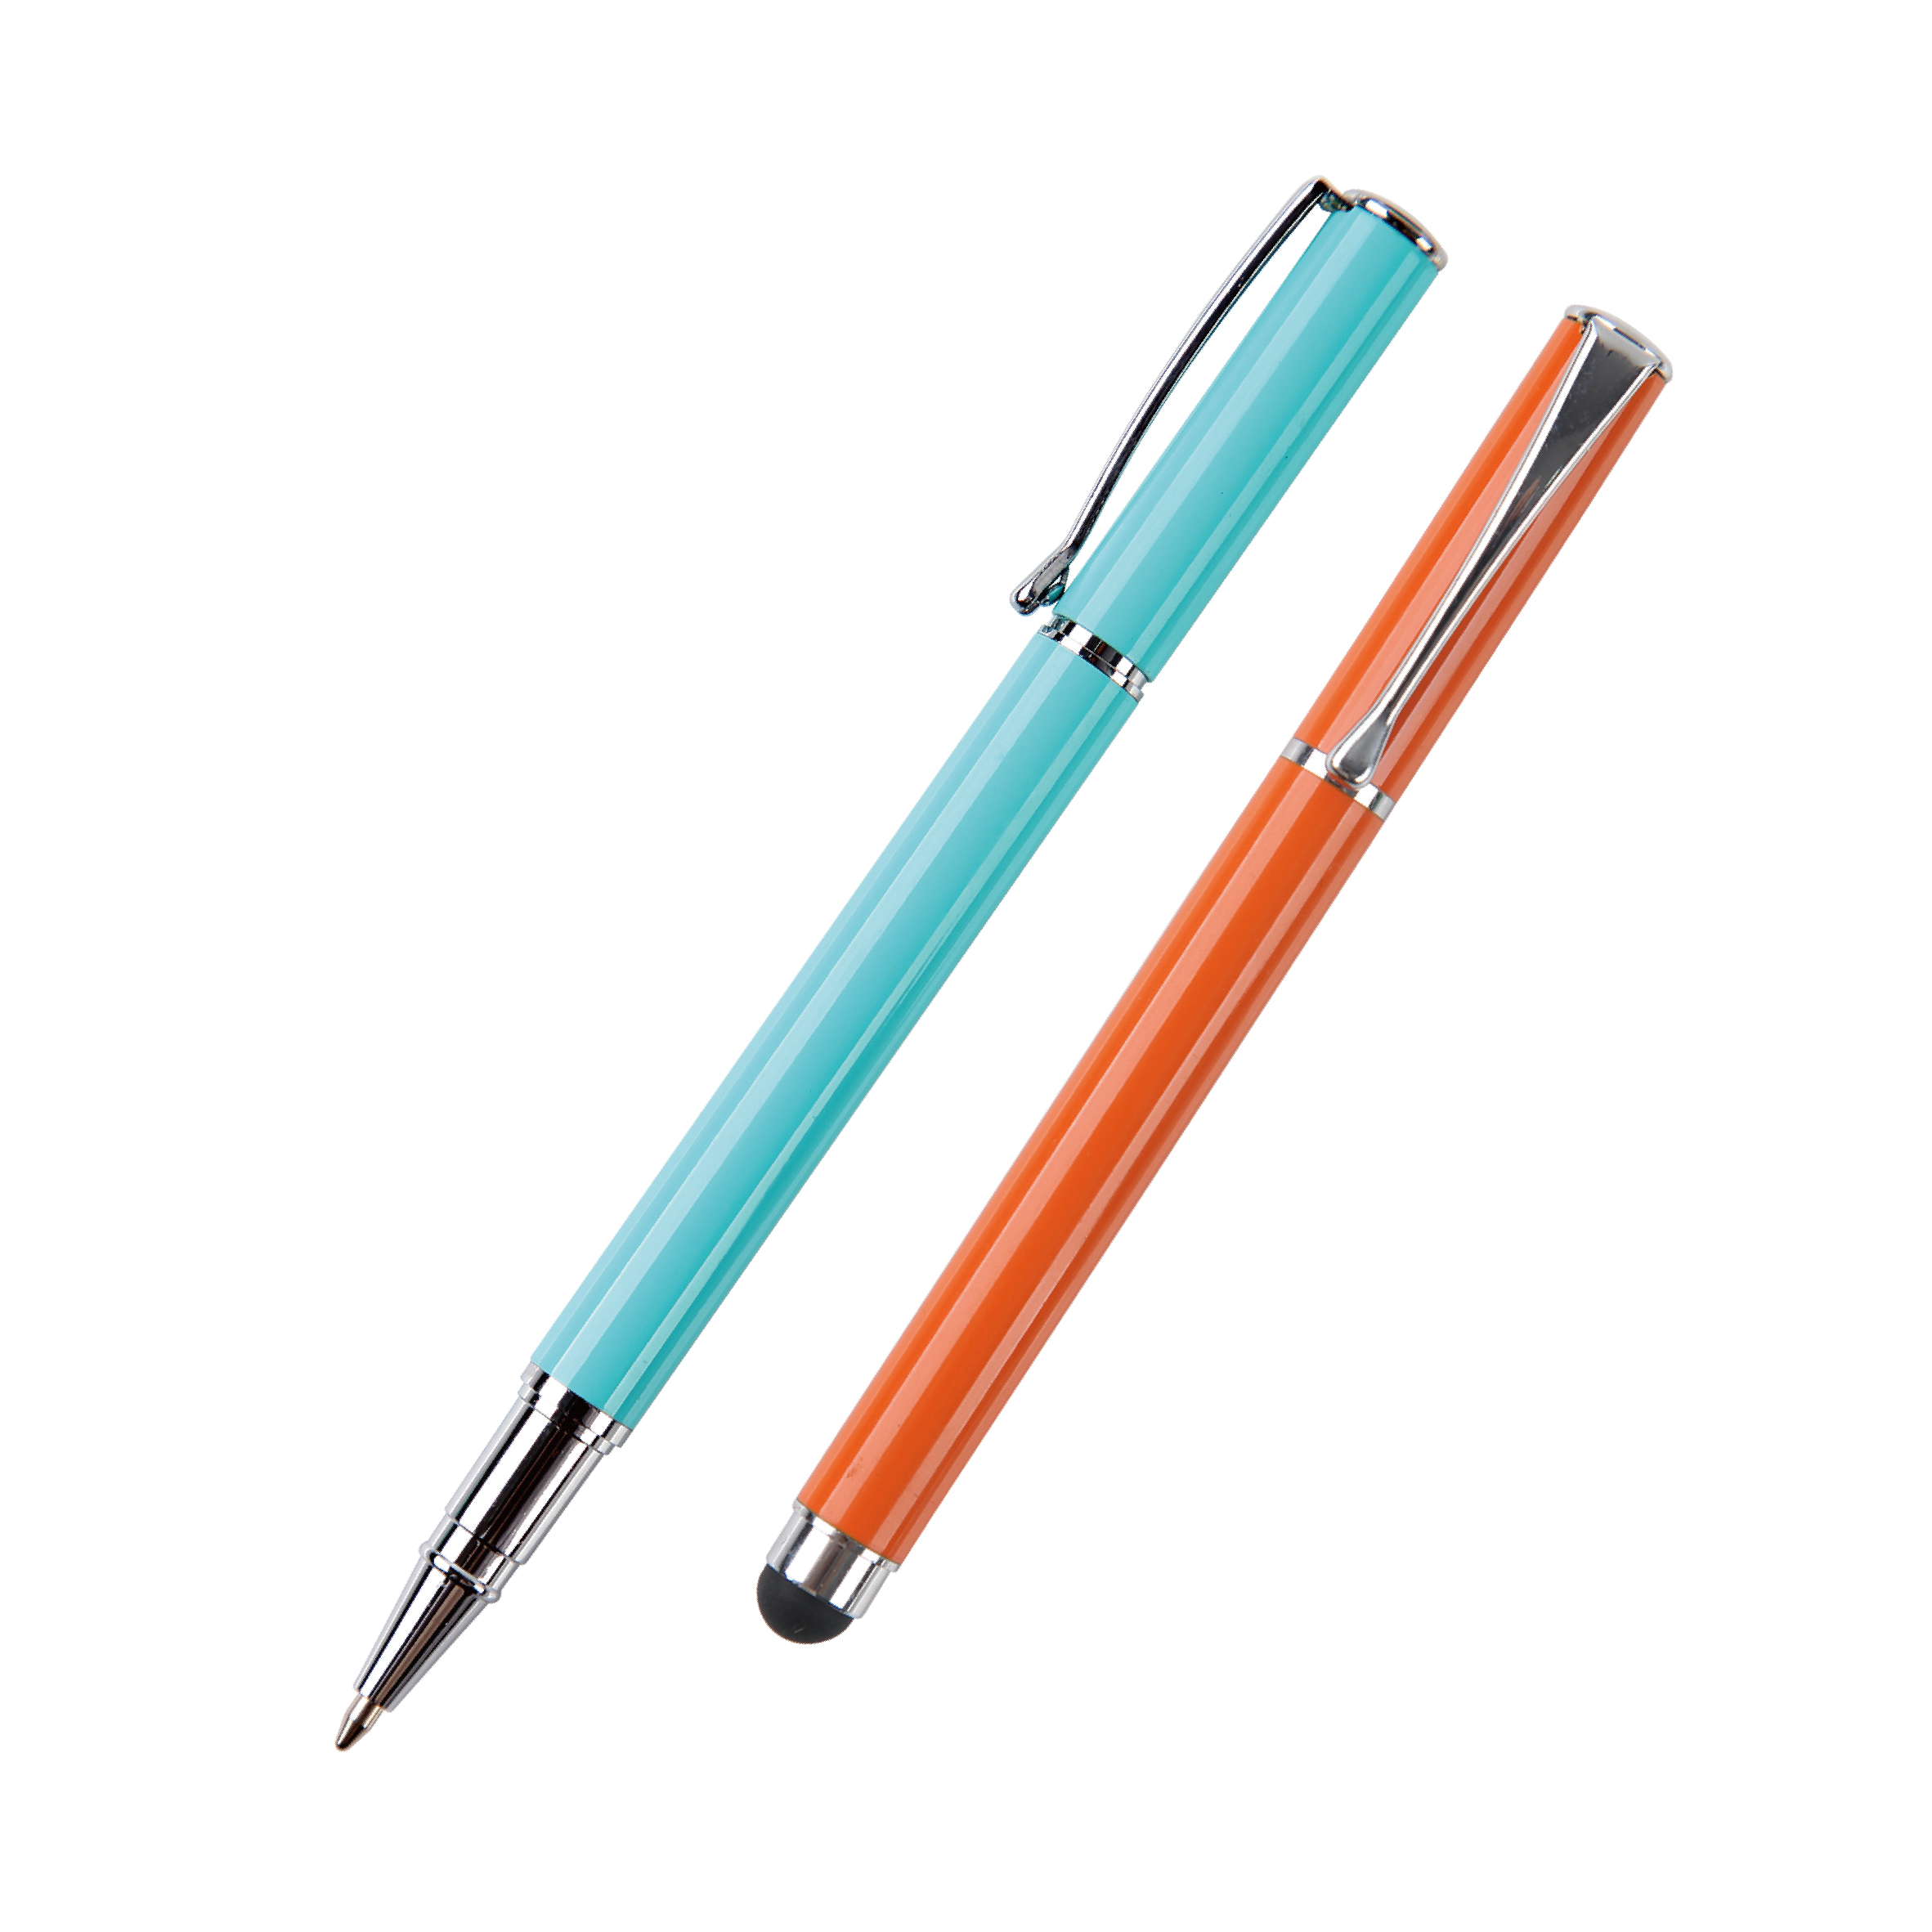 Versatile Twistable Metal Cap Type Ball Pen with Phone Stylus on End